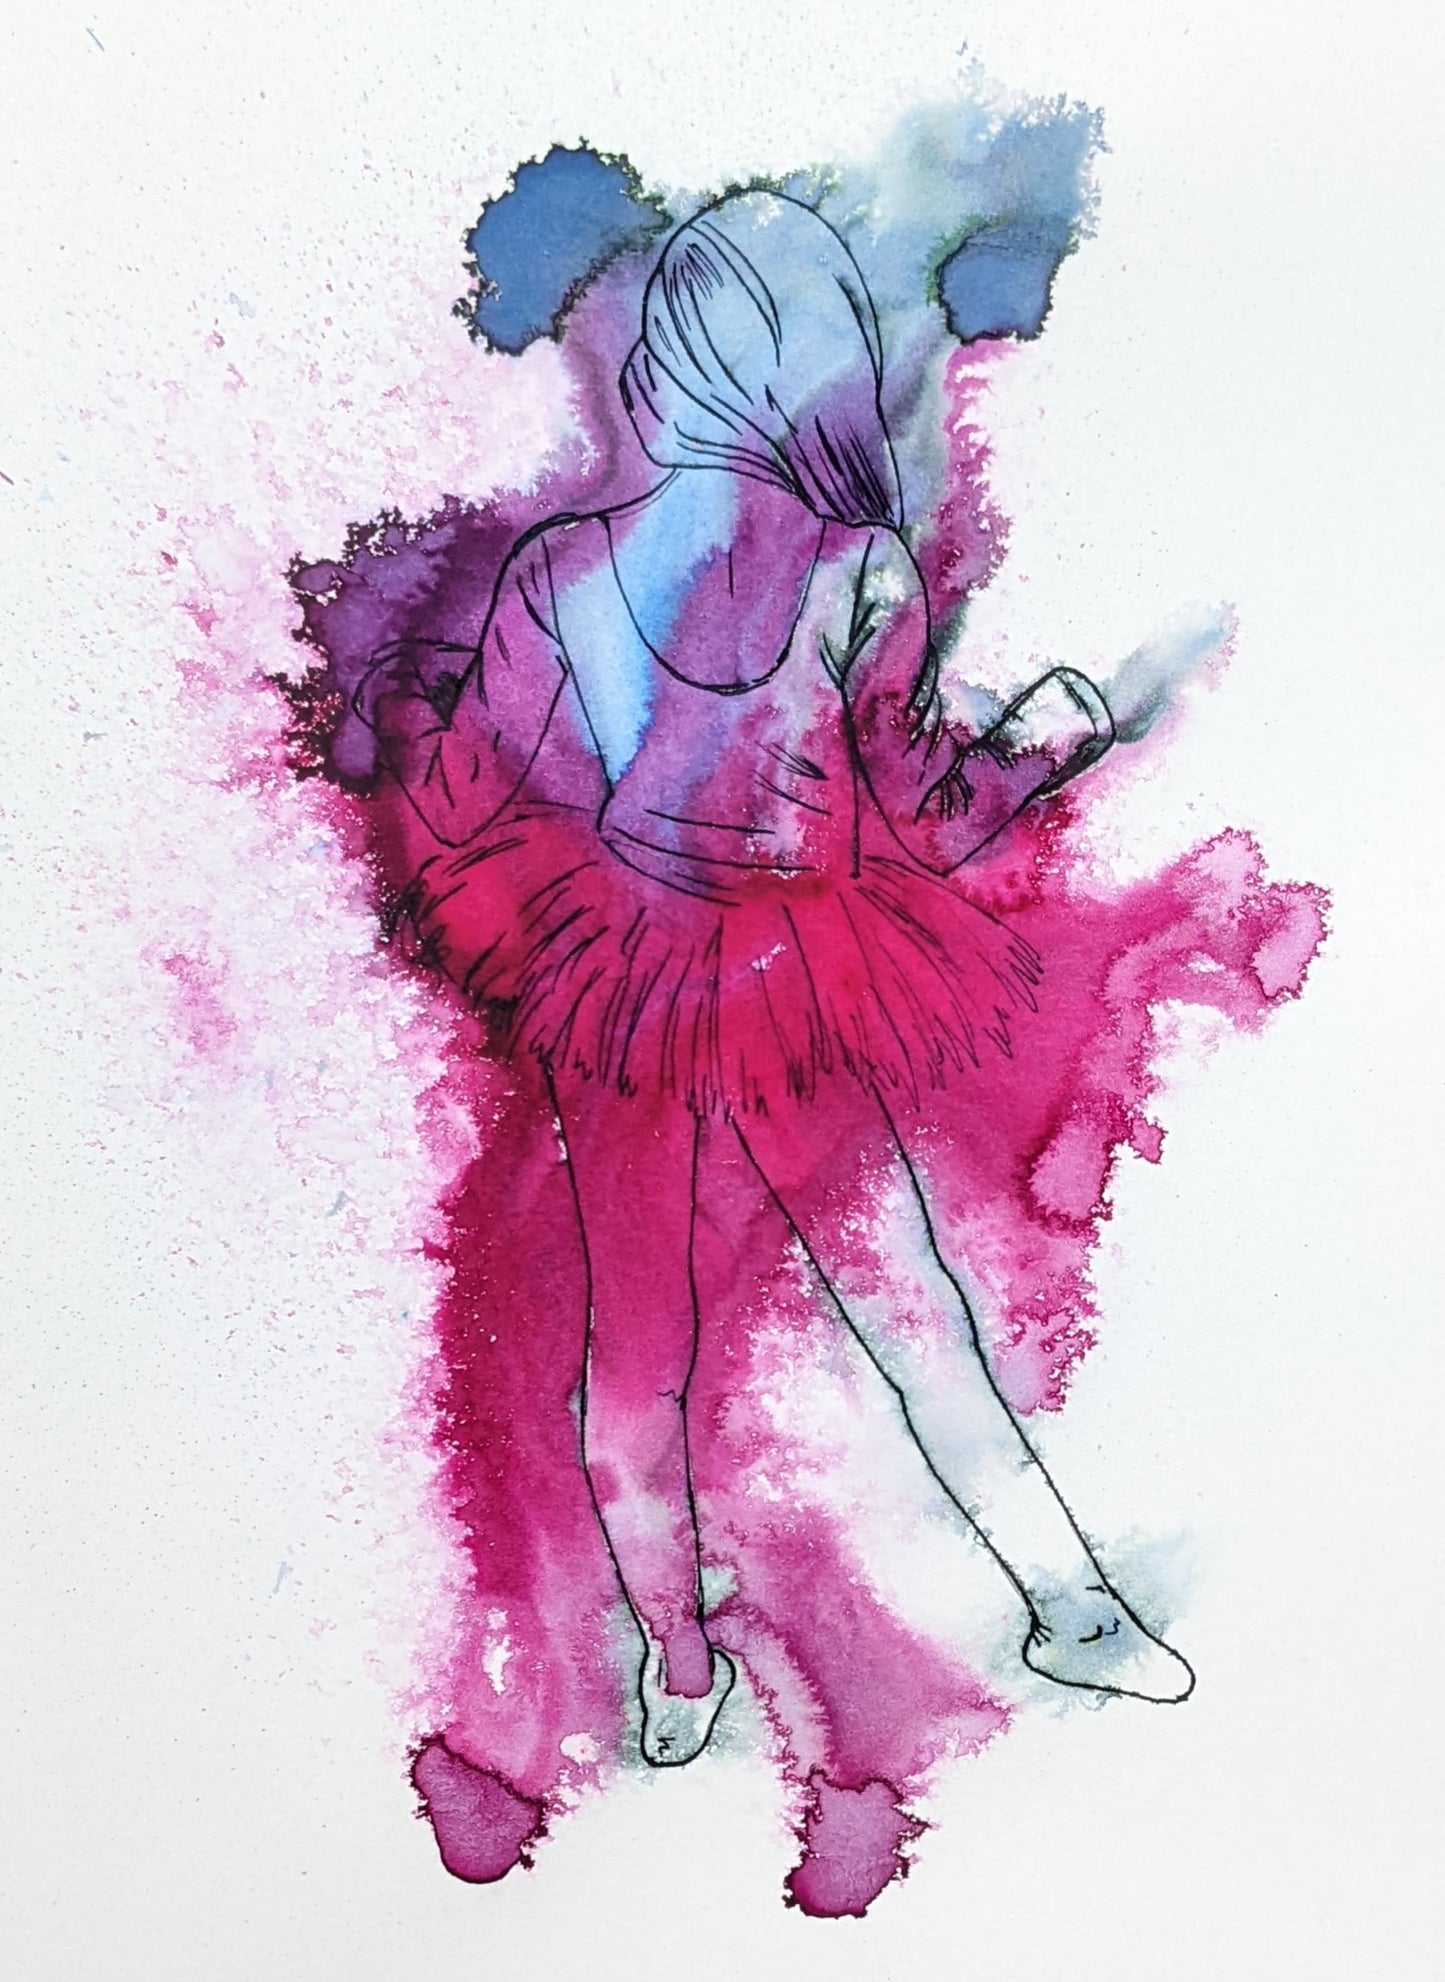 Original and prints of JOY, an original ink painting in pink and blue, a stunning addition to any contemporary home decor. by British female artist Dianne Bowell.